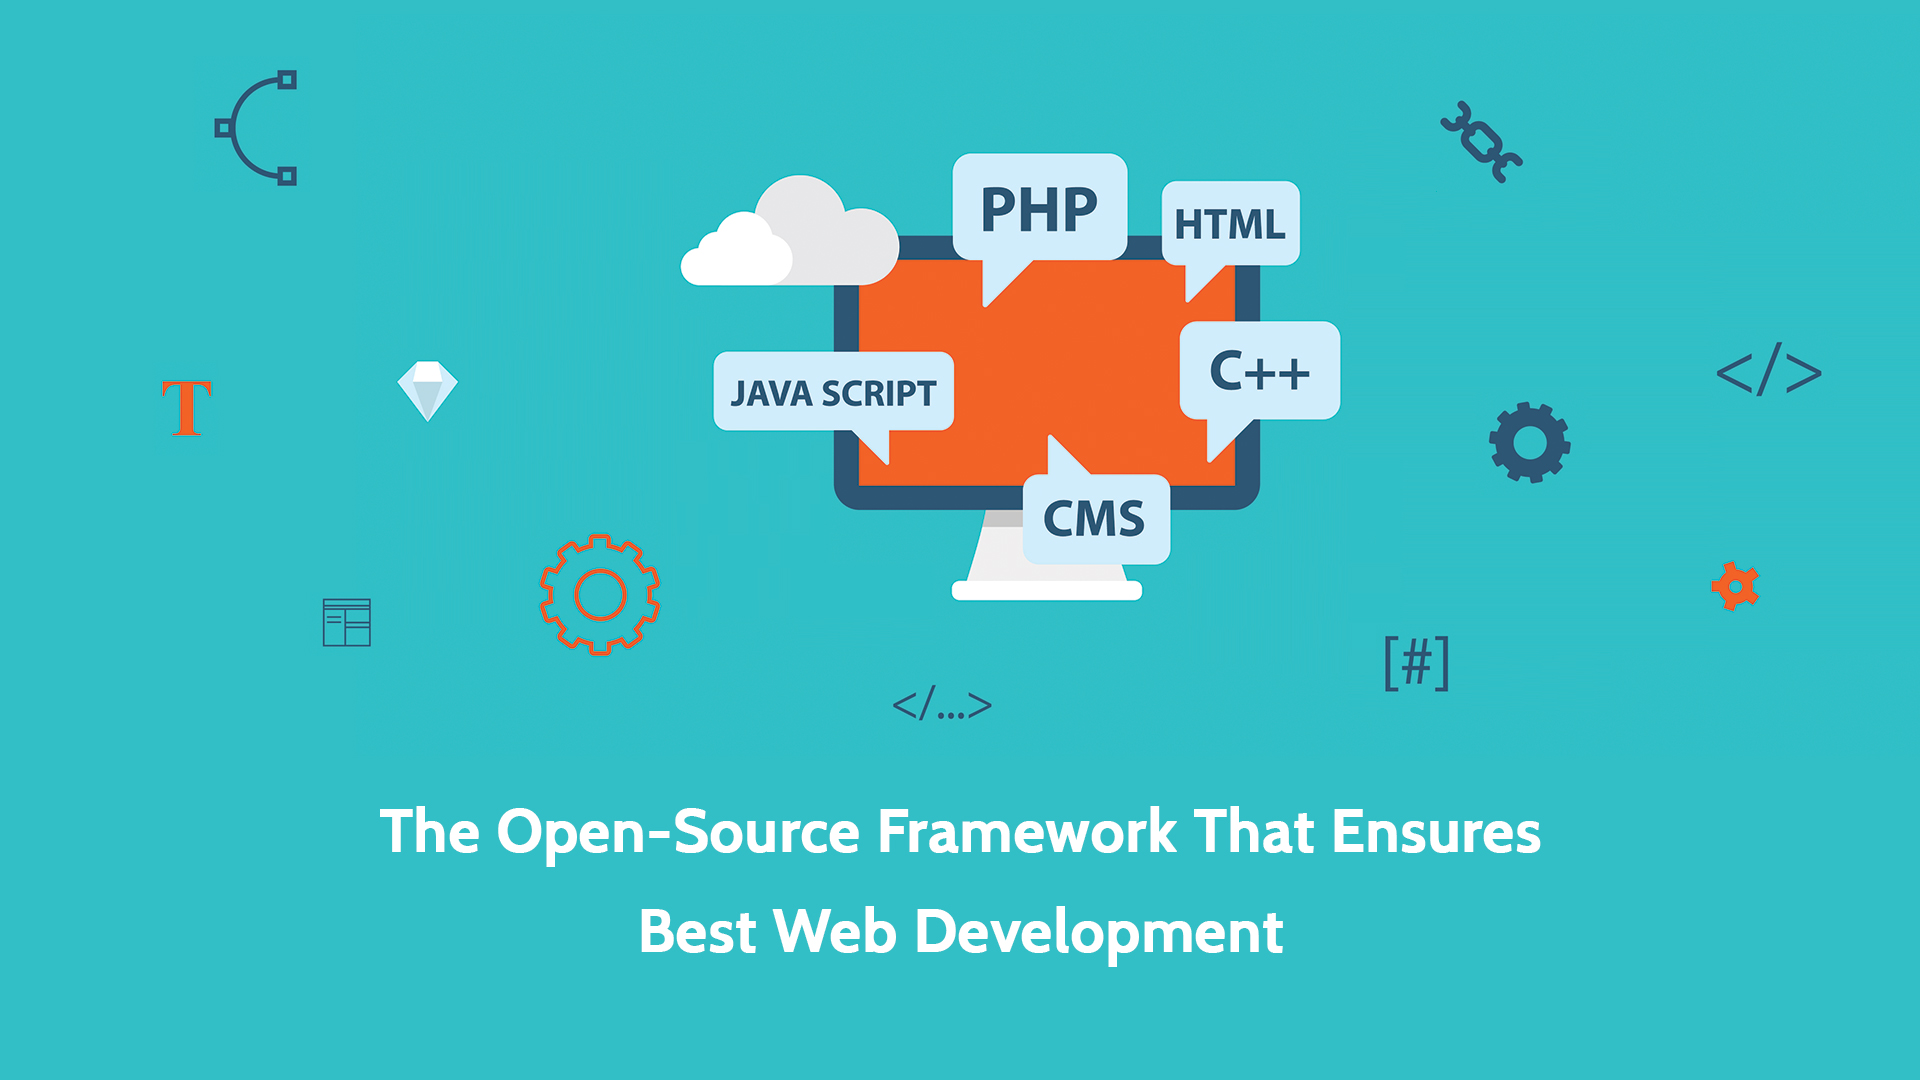 PHP: The Open-Source Framework That Ensures Best Web Development